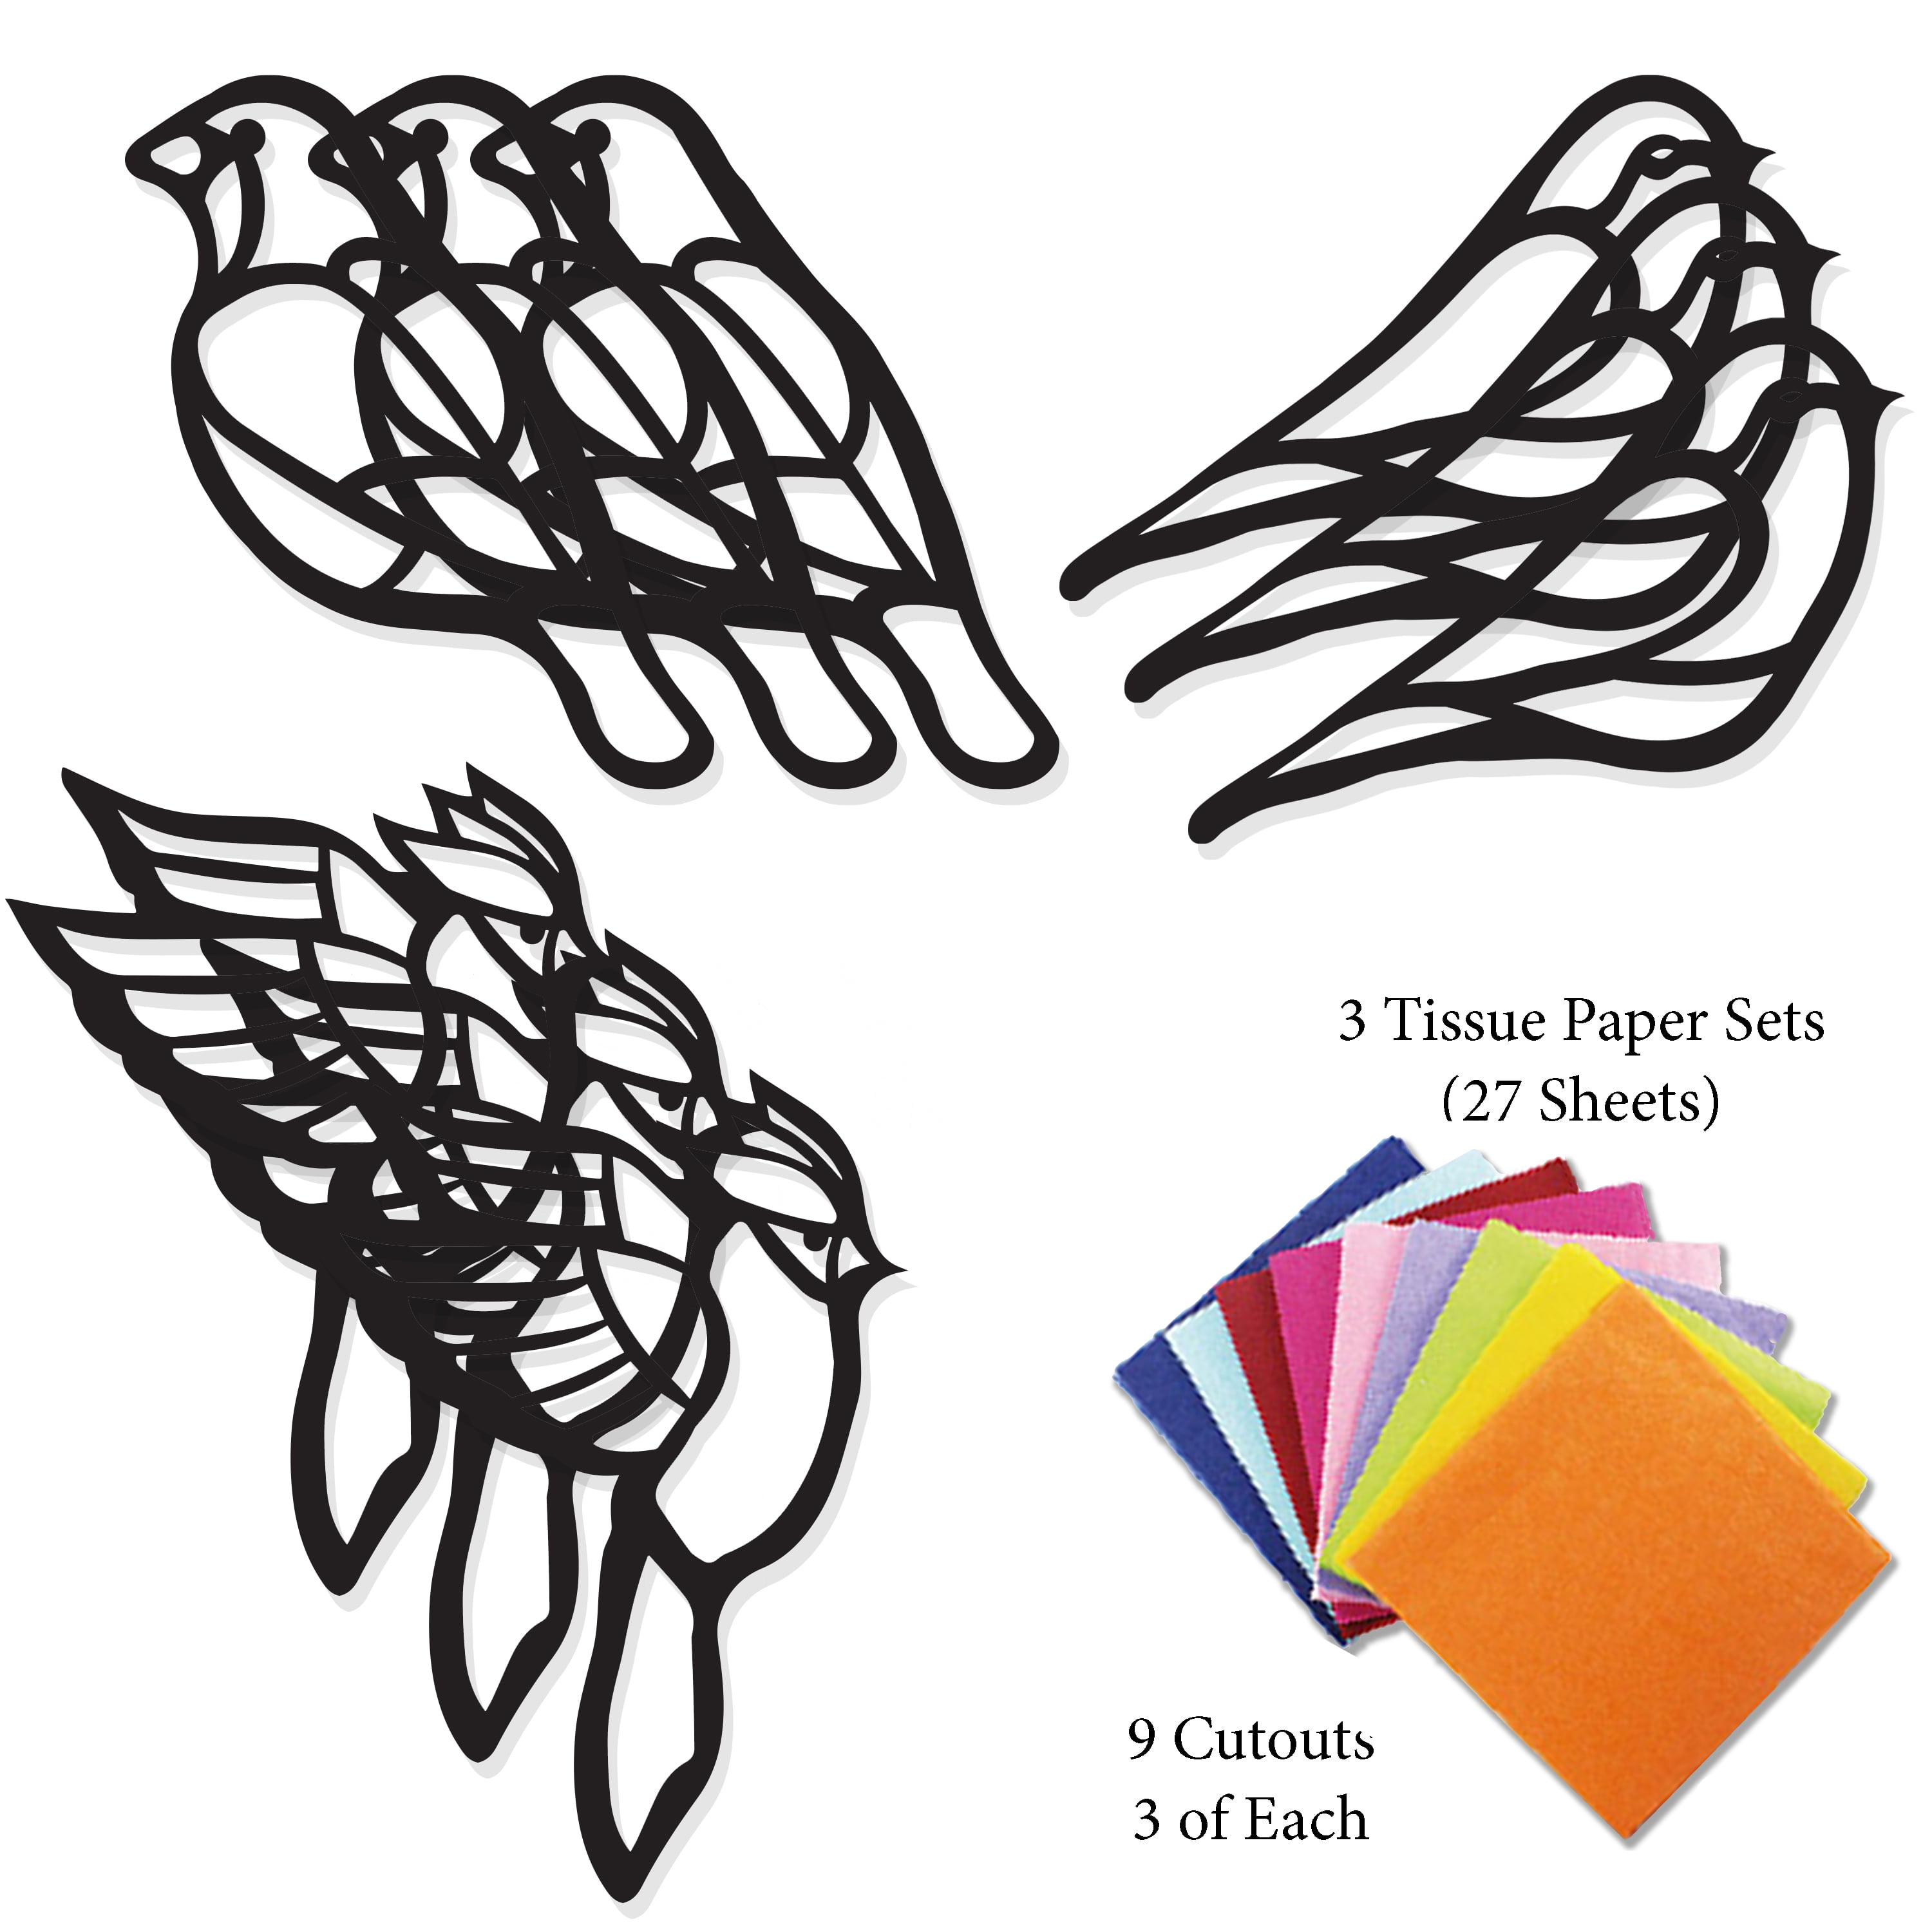 Baker Ross Kite Suncatcher Craft - Pack of 10, Stained Glass Effect for  Kids to Decorate and Display for Arts and Craft Activities (FE407)